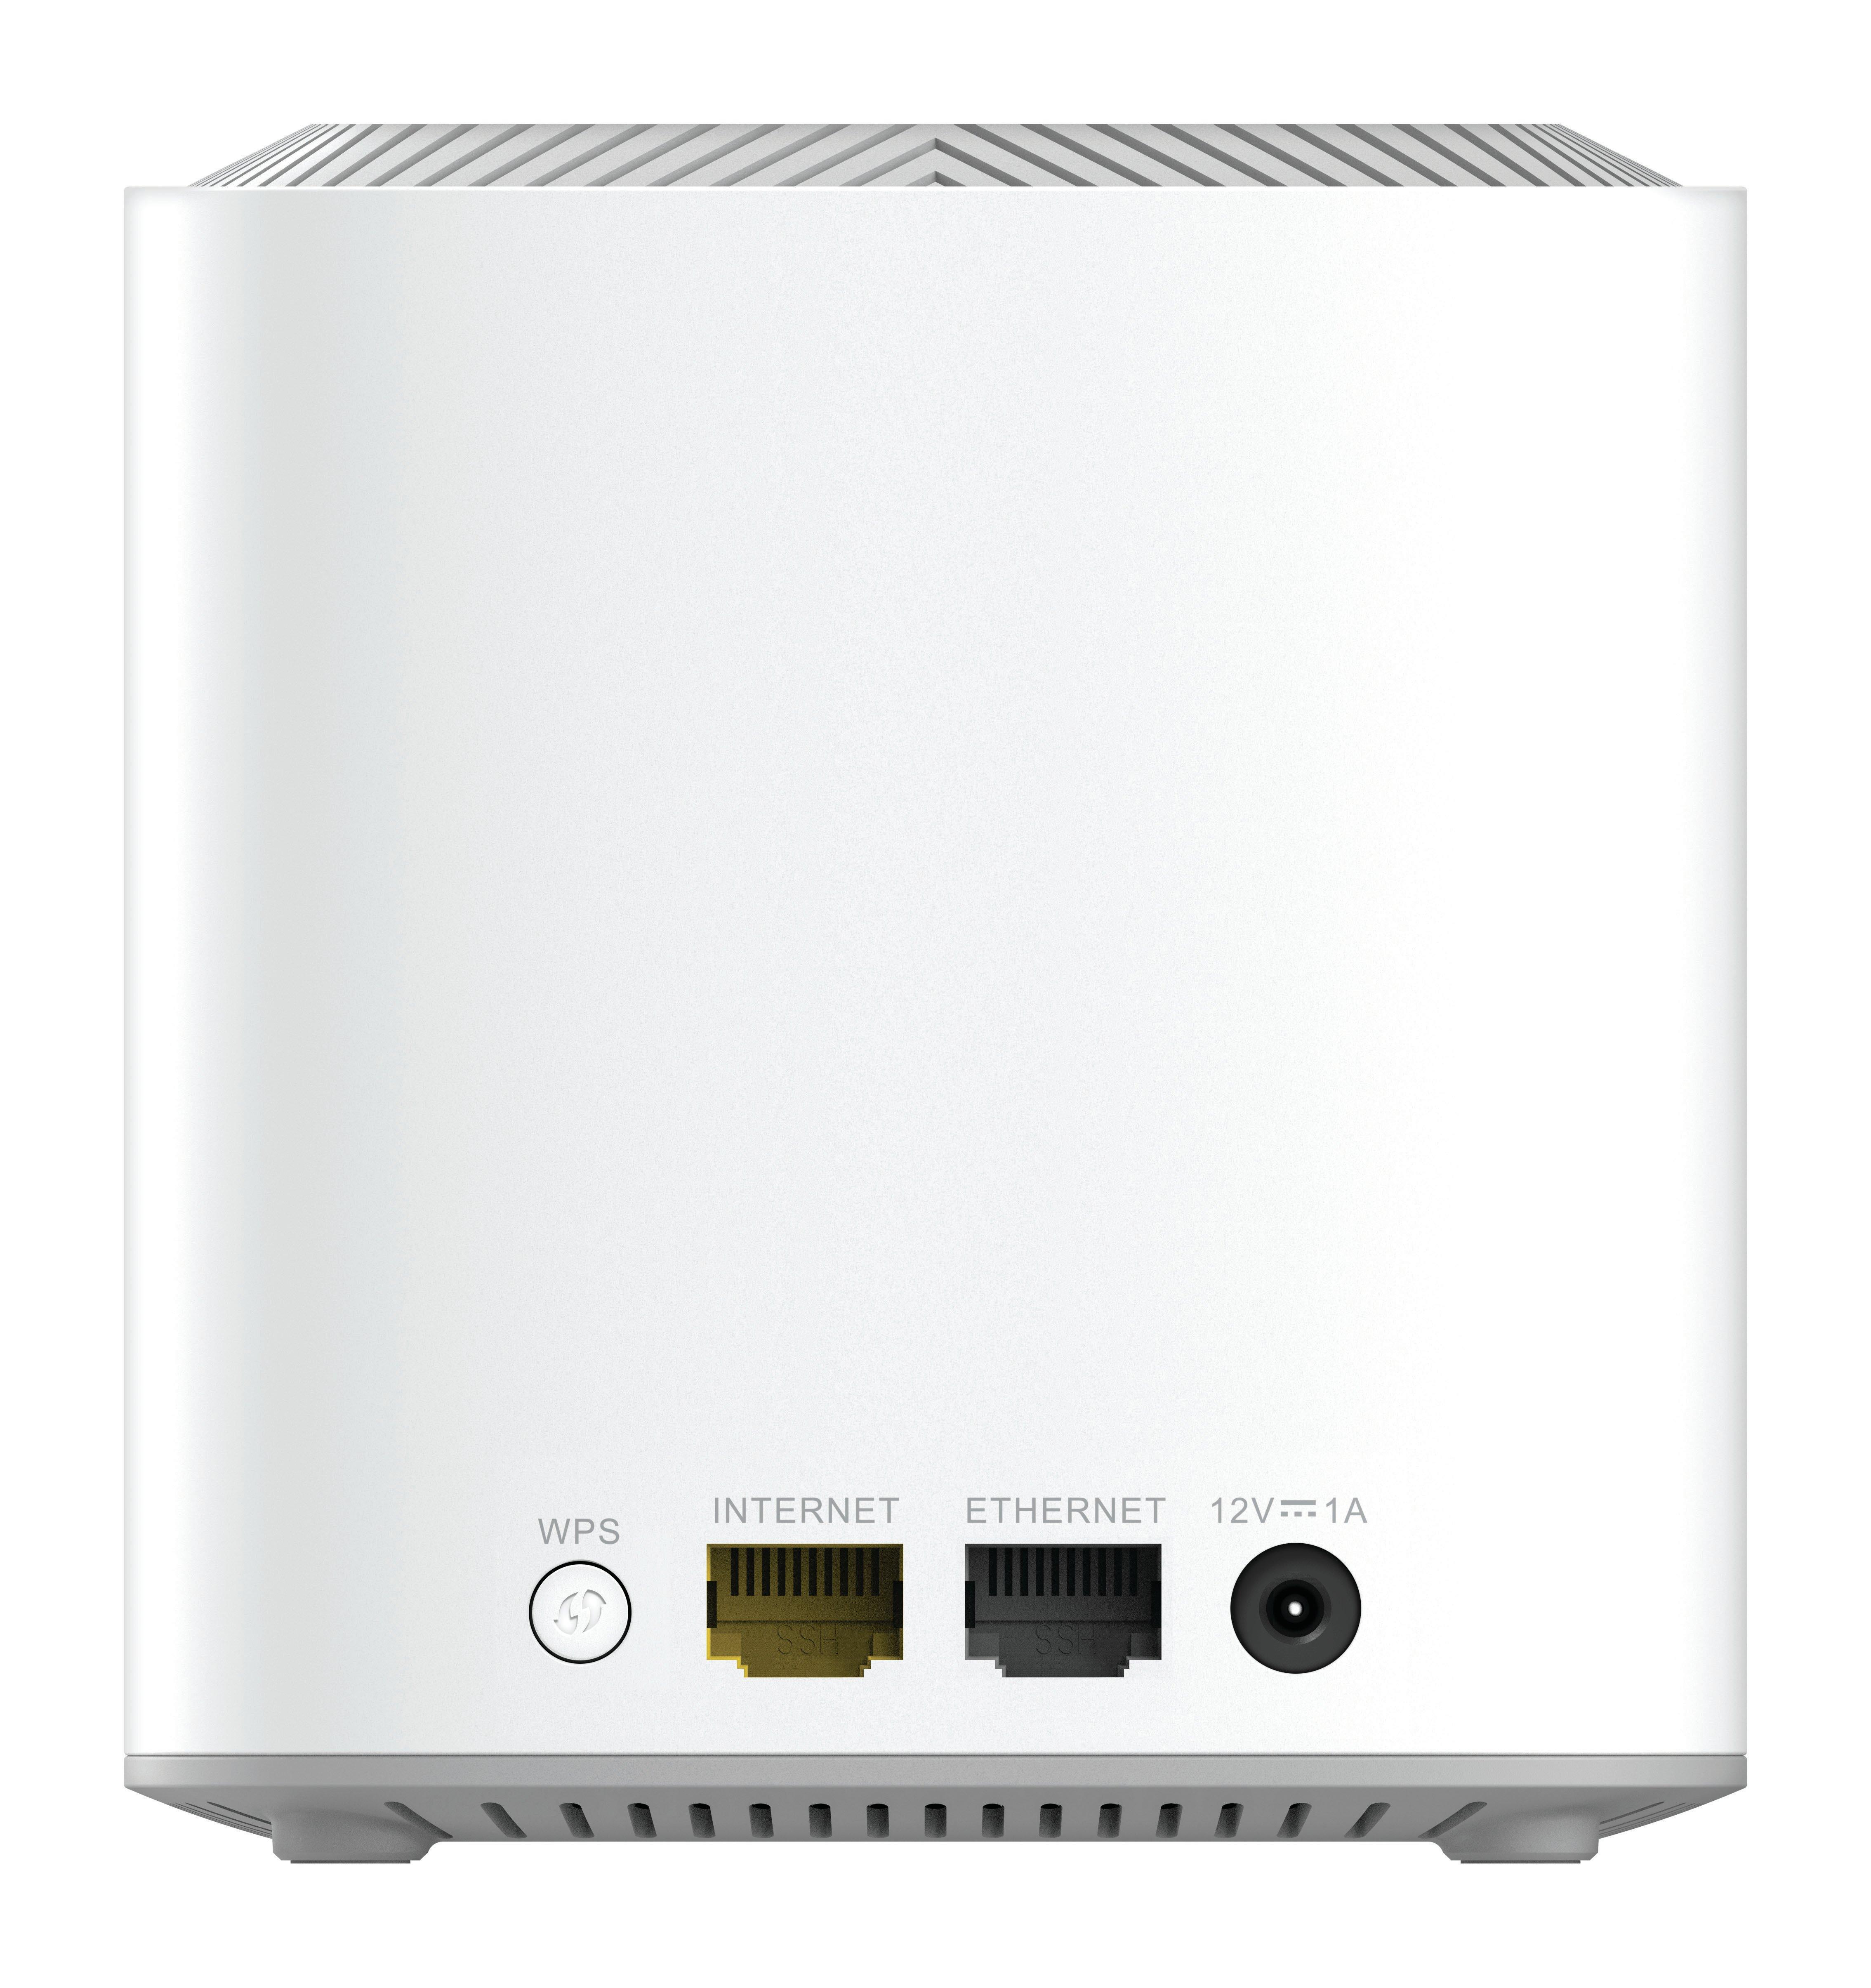 D-Link  COVR-X1863 WLAN Access Point 1800 Mbit/s Weiß Power over Ethernet (PoE) 